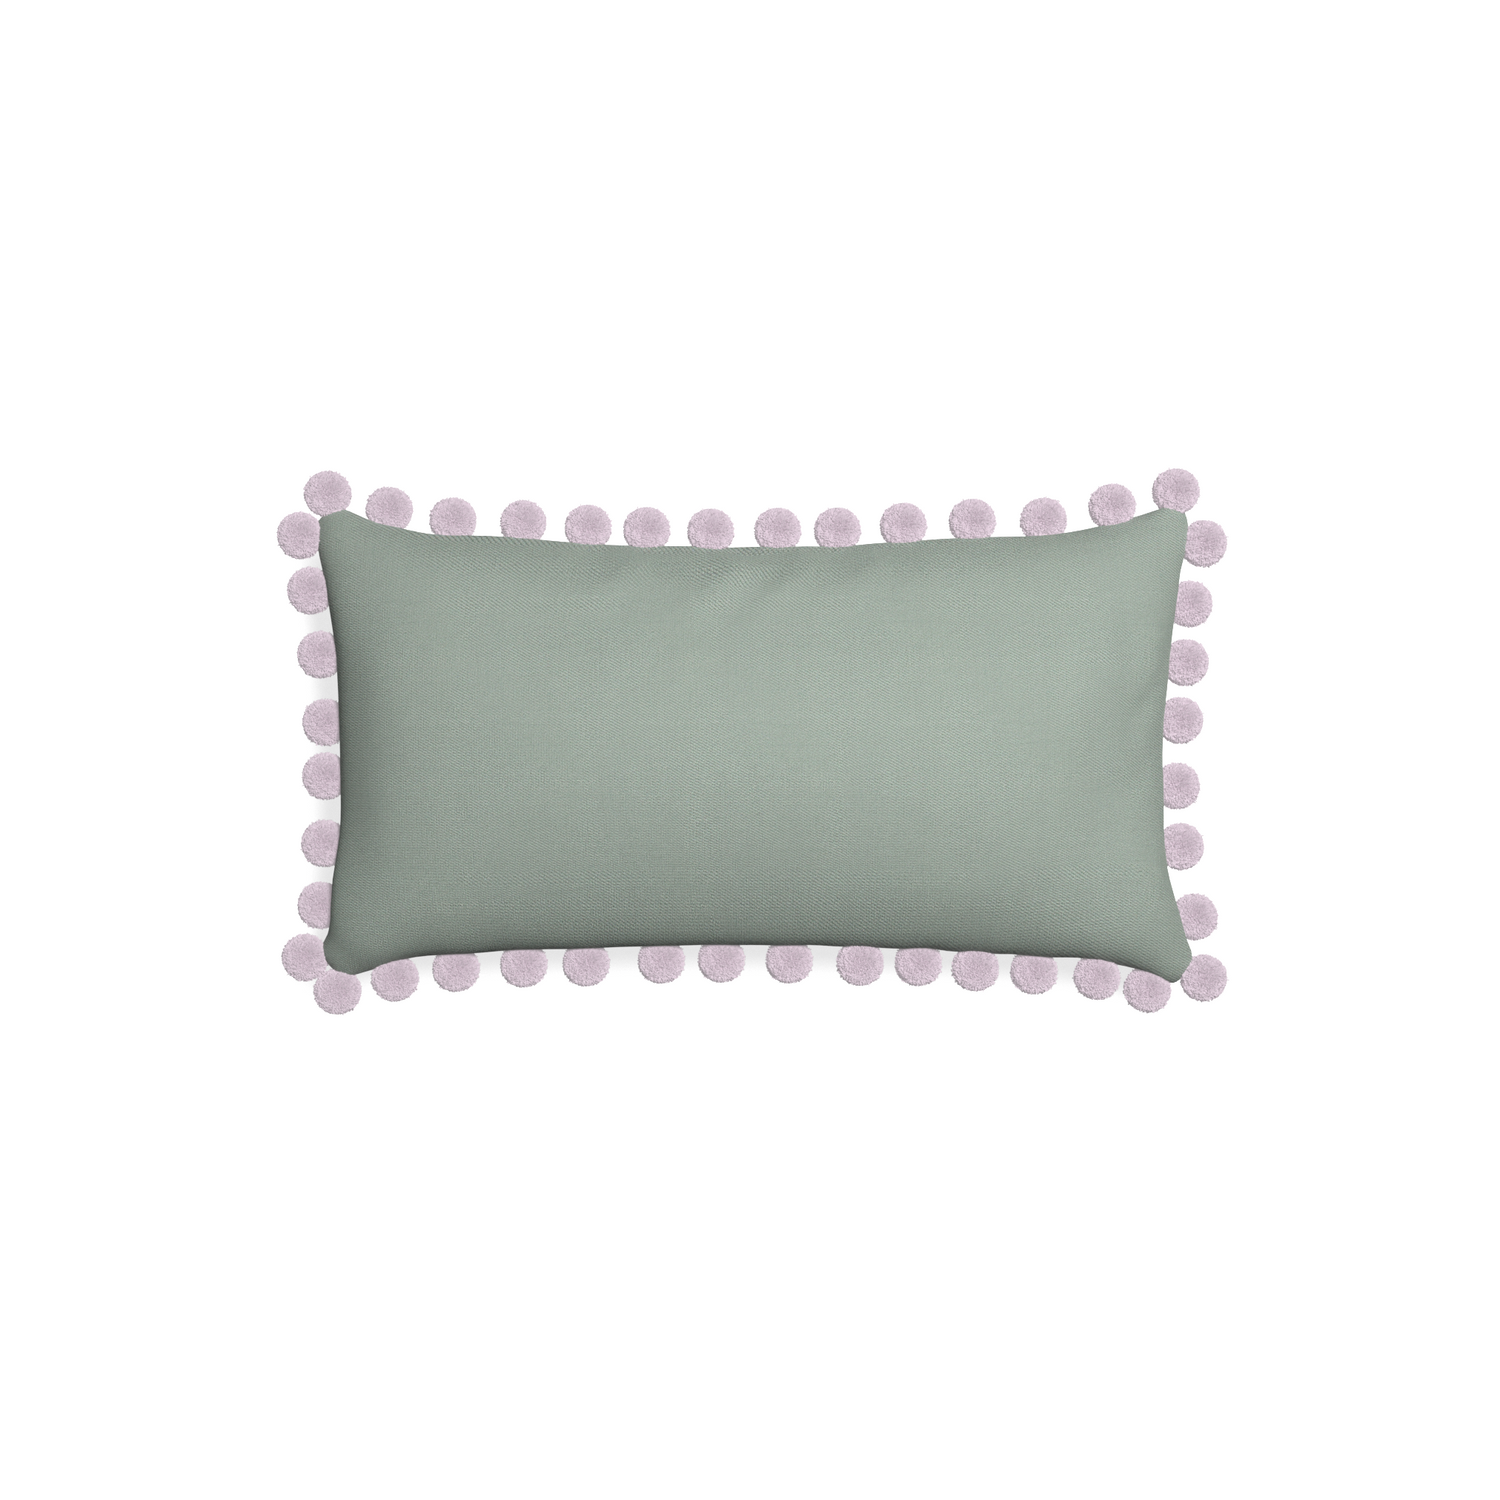 Petite-lumbar sage custom sage green cottonpillow with l on white background